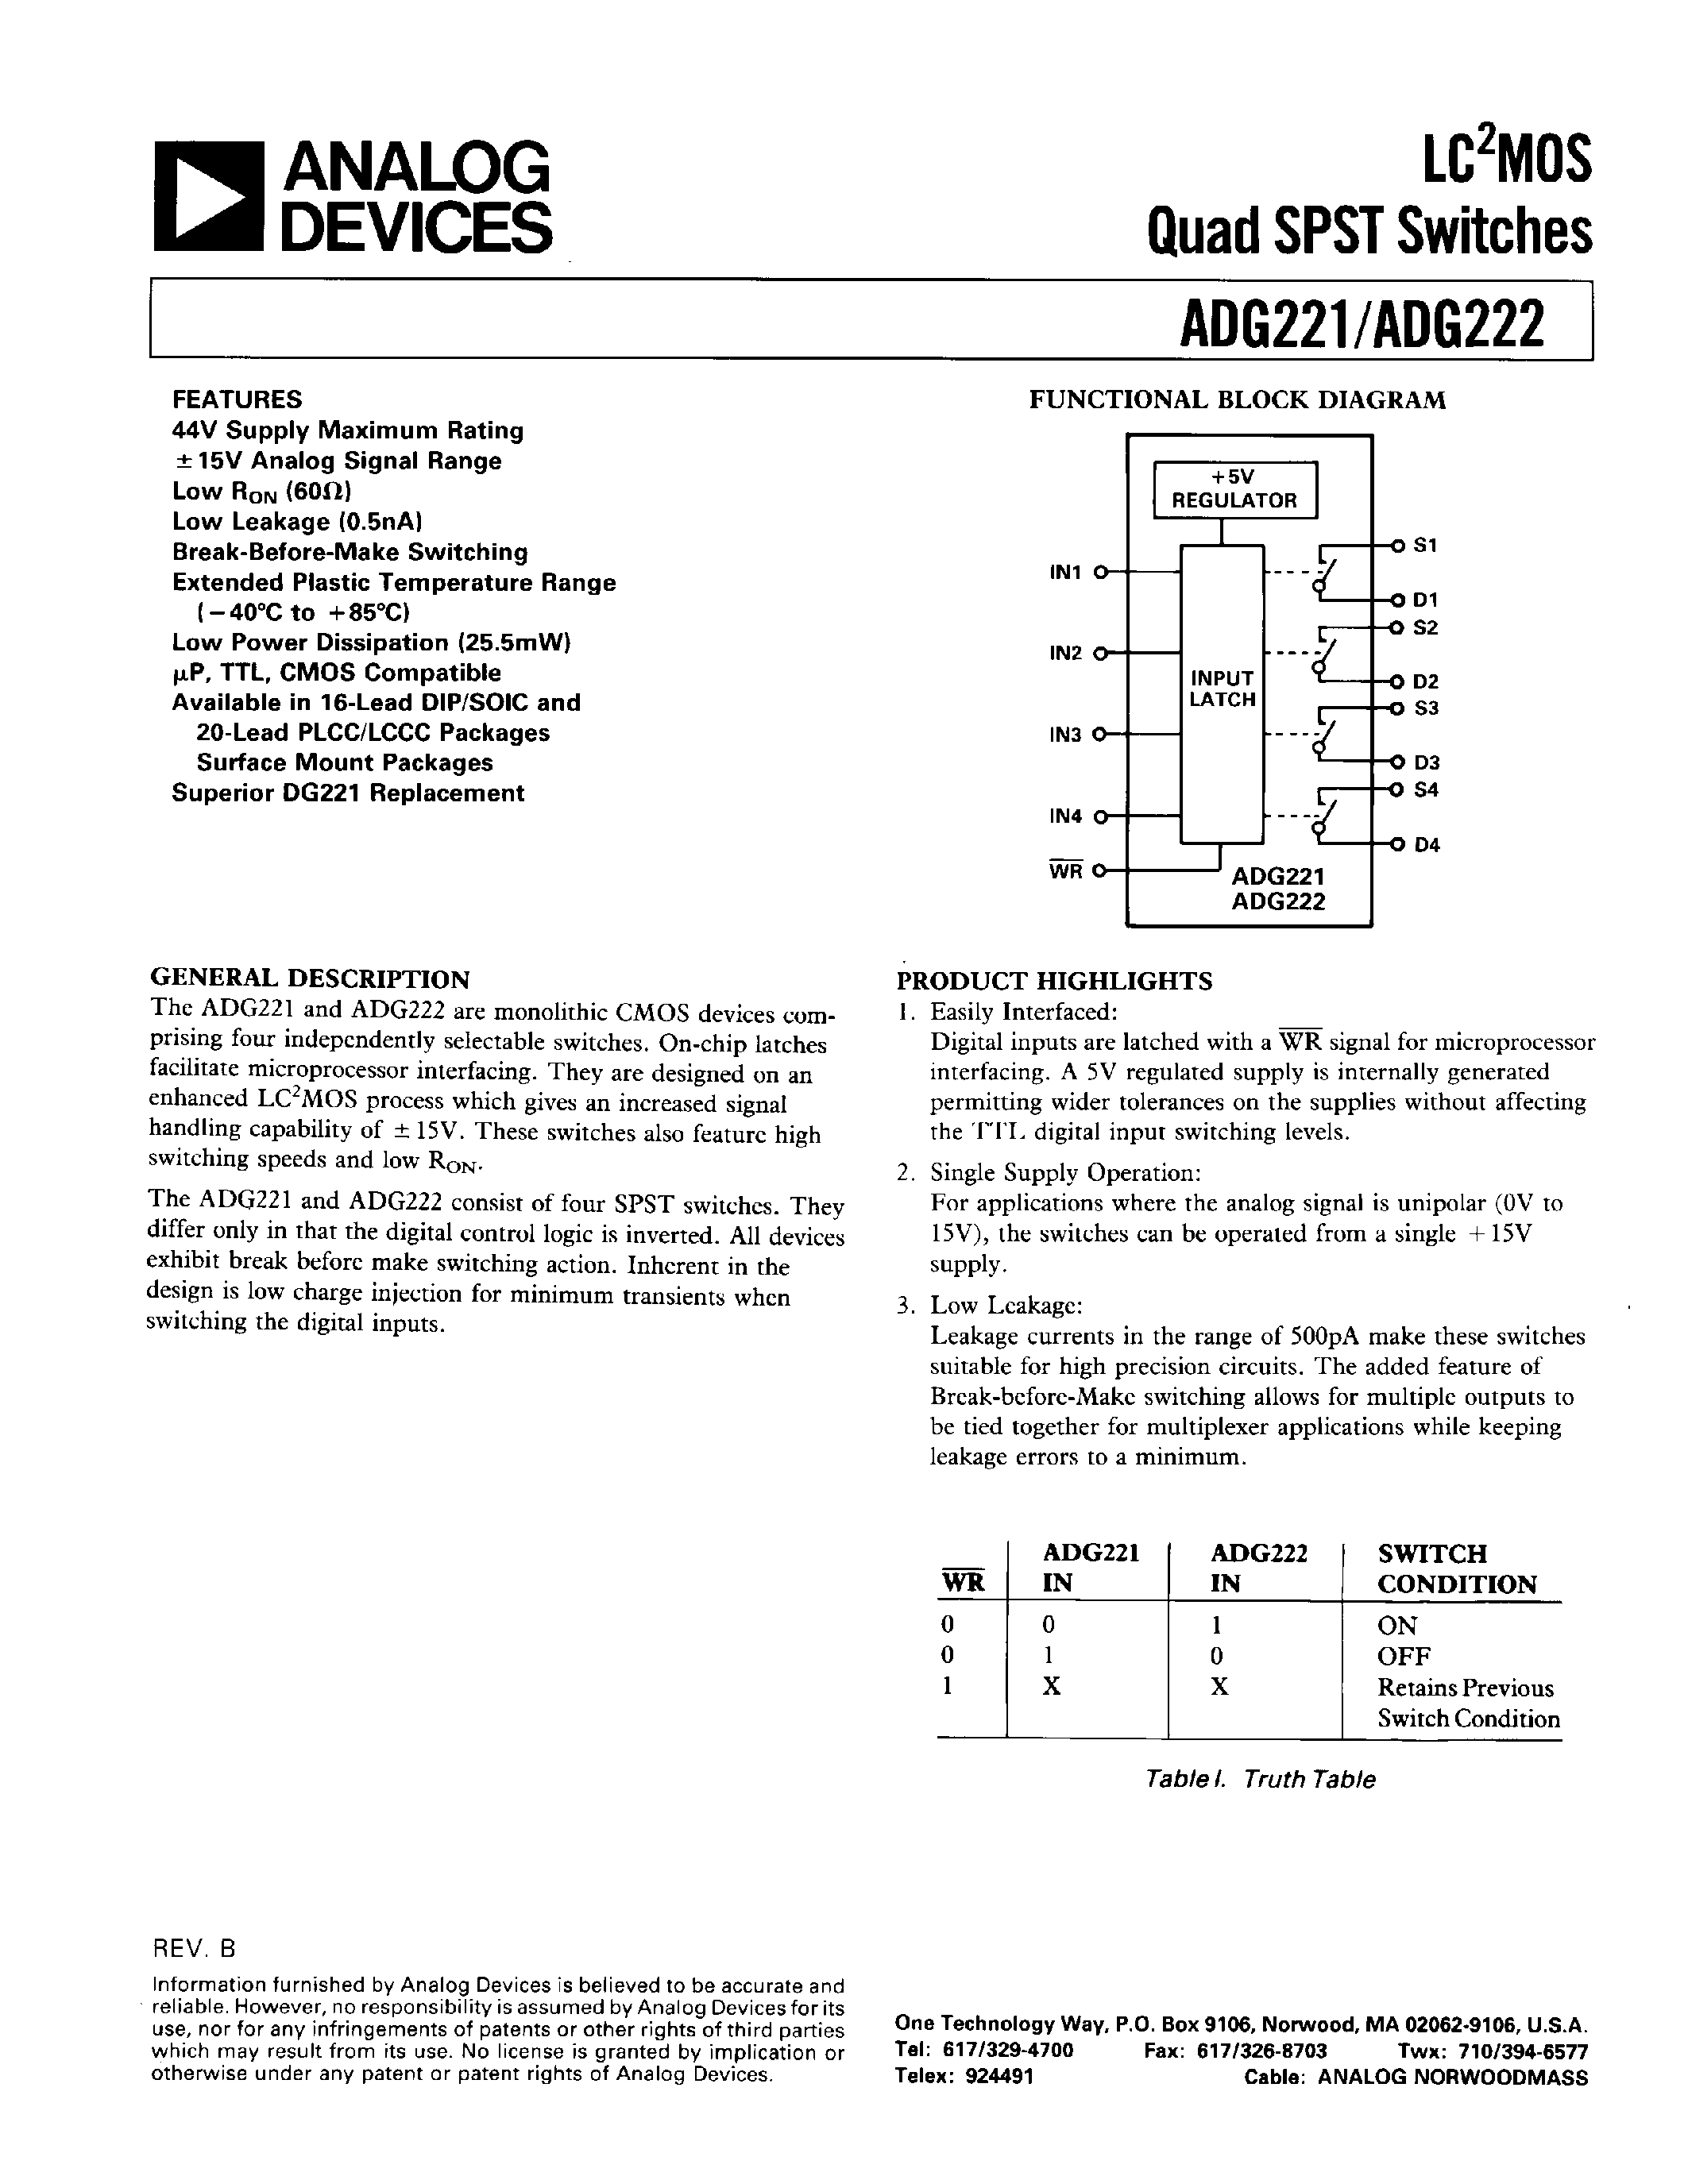 Datasheet ADG222 - LC2MOS QUAD SPST SWITCHES page 1